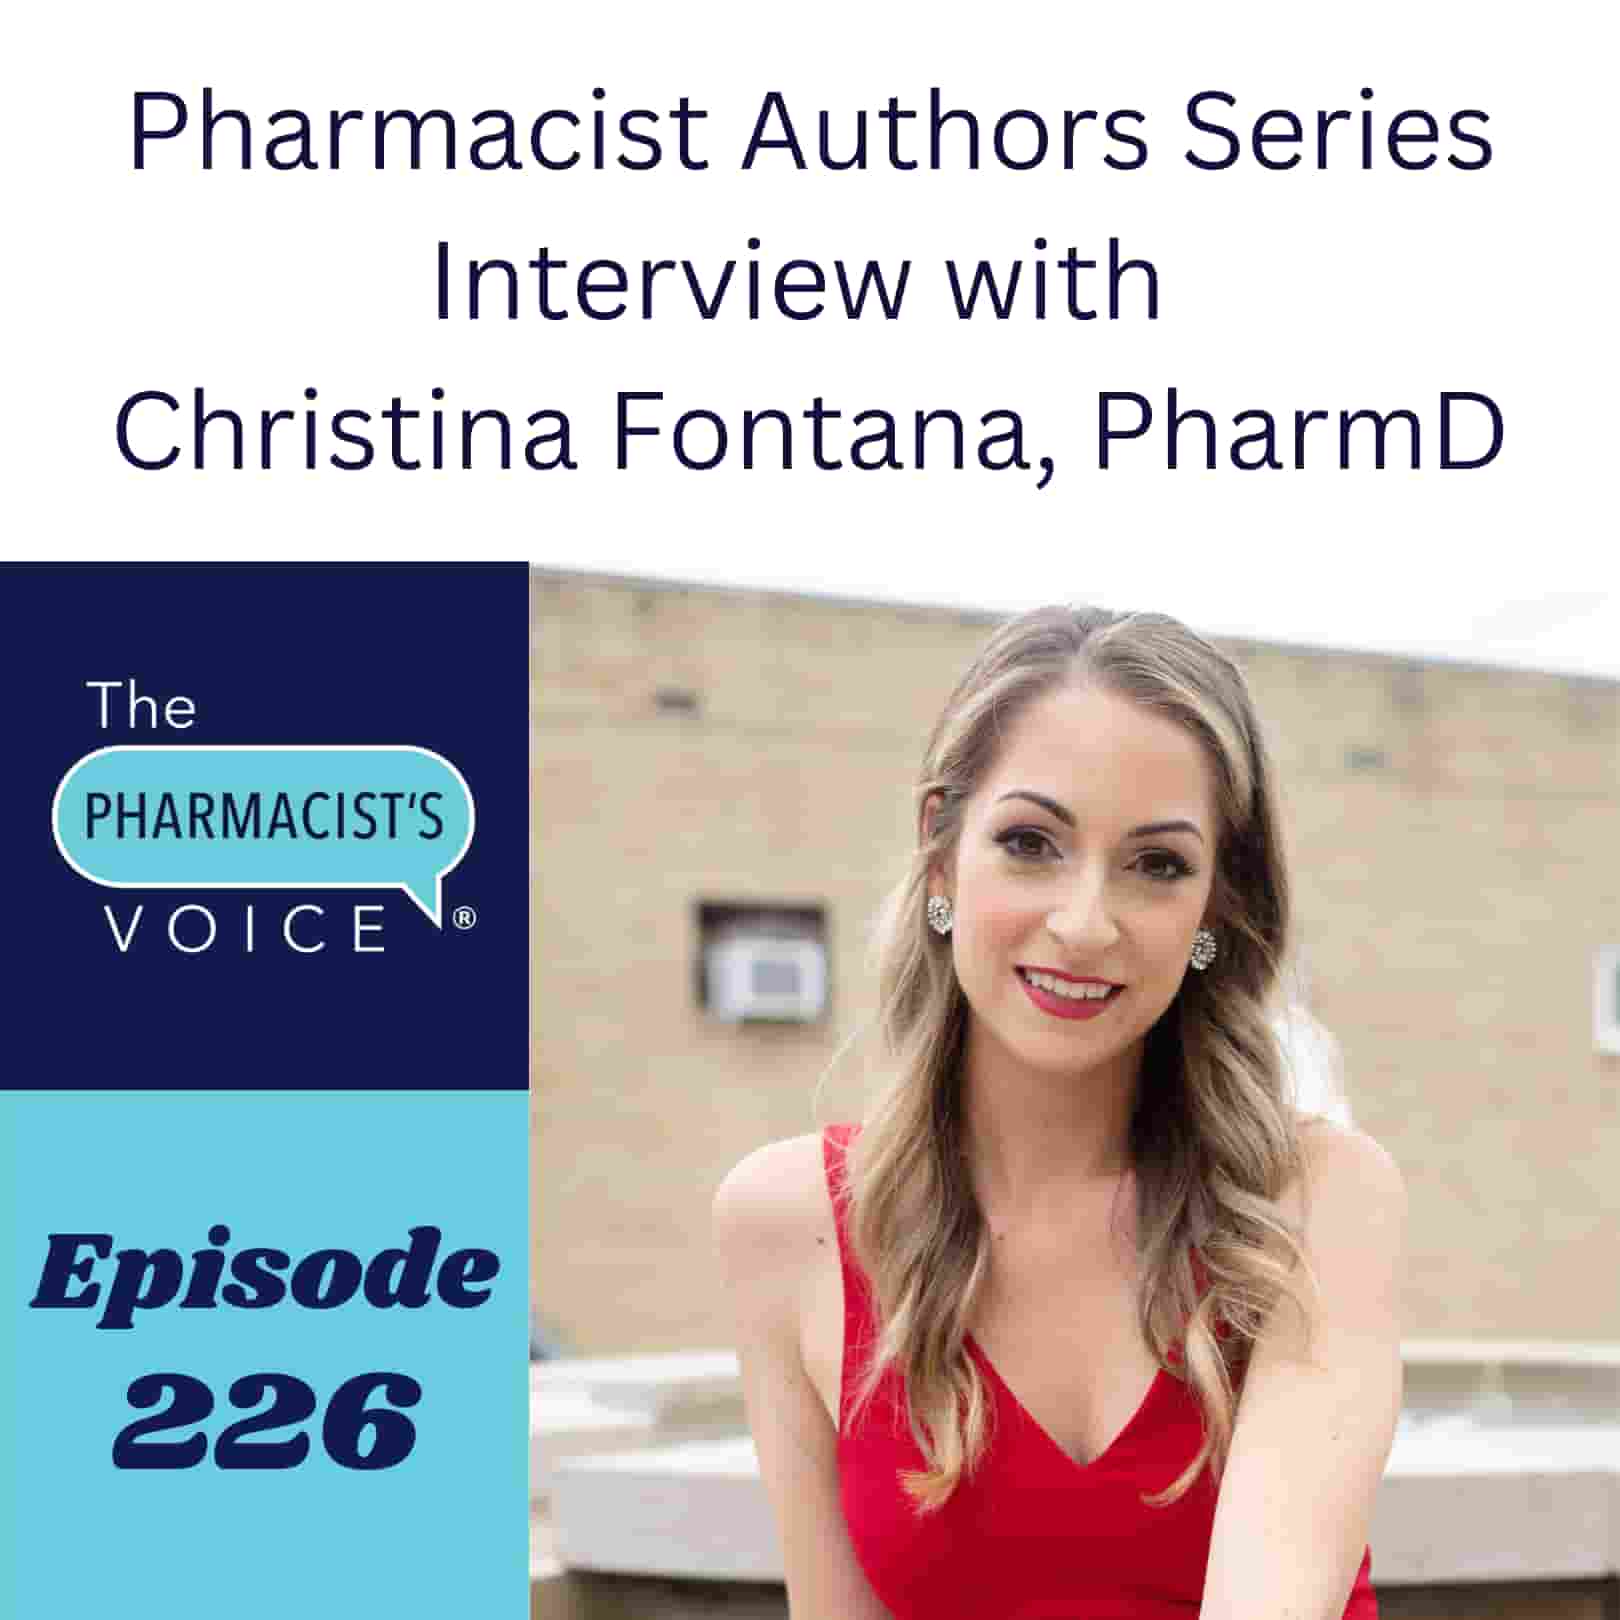 Pharmacist Authors Series Interview with Christina Fontana, PharmD. The Pharmacist's Voice Podcast Episode 226